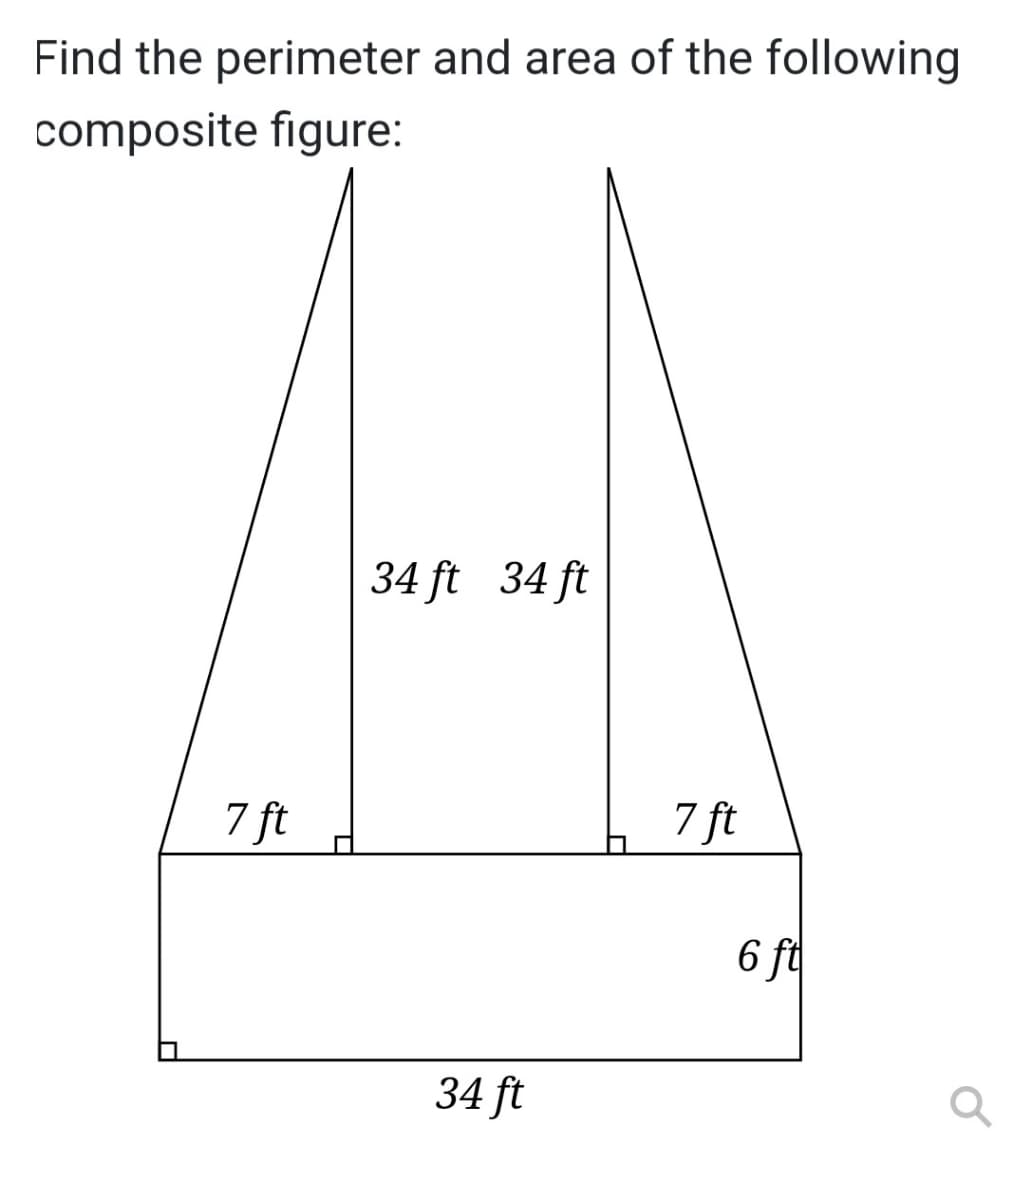 Find the perimeter and area of the following
composite figure:
34 ft 34 ft
7 ft
7 ft
6 ft
34 ft
